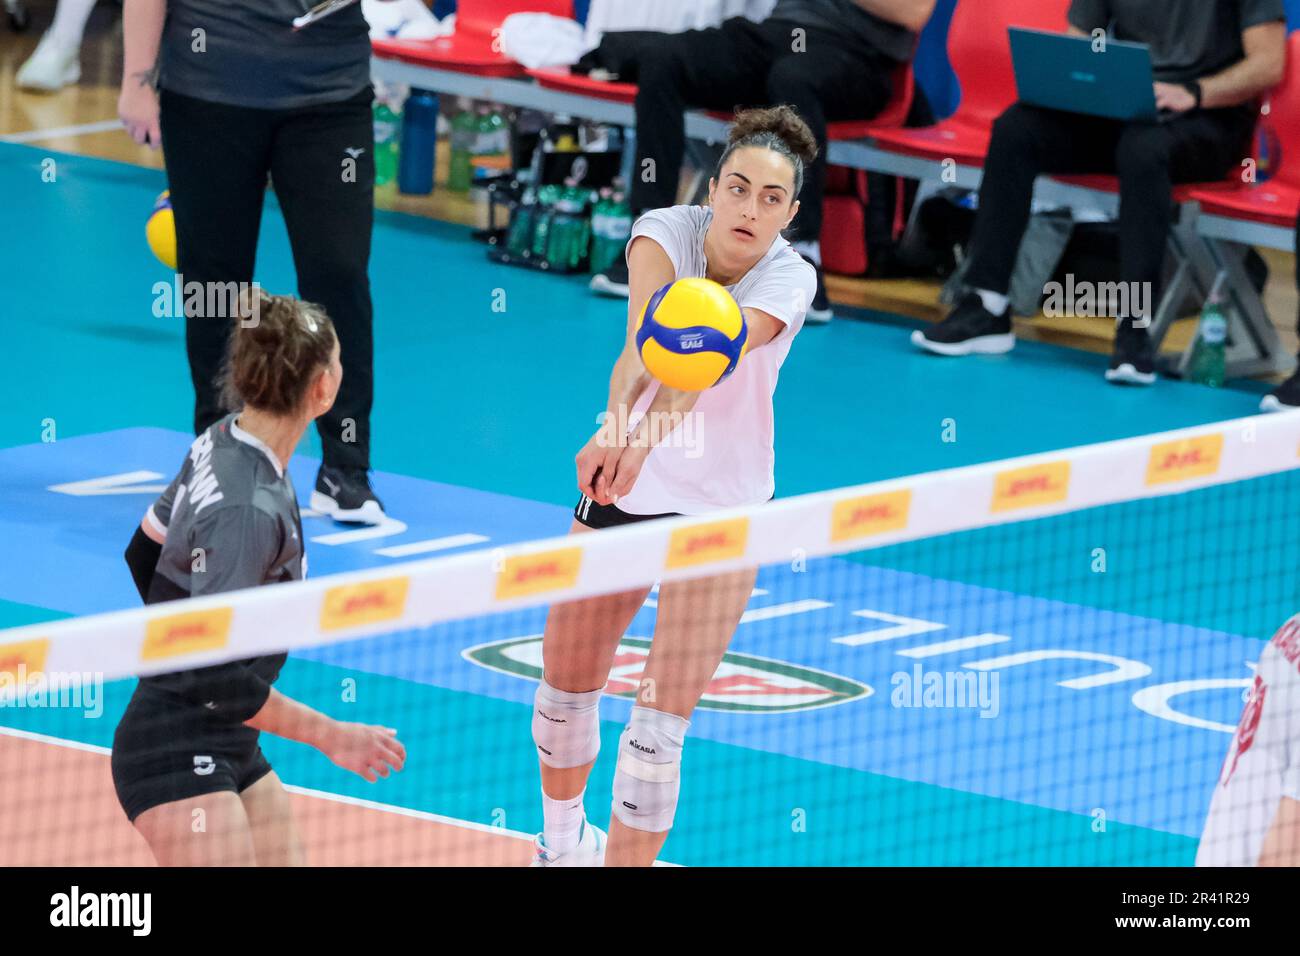 Andrea Mitrovic (R) of Canada in action during the DHL Test Match Tournament women’s volleyball between Italy and Canada at Palazzetto dello Sport. Final score; Italy 3:1 Canada. Stock Photo